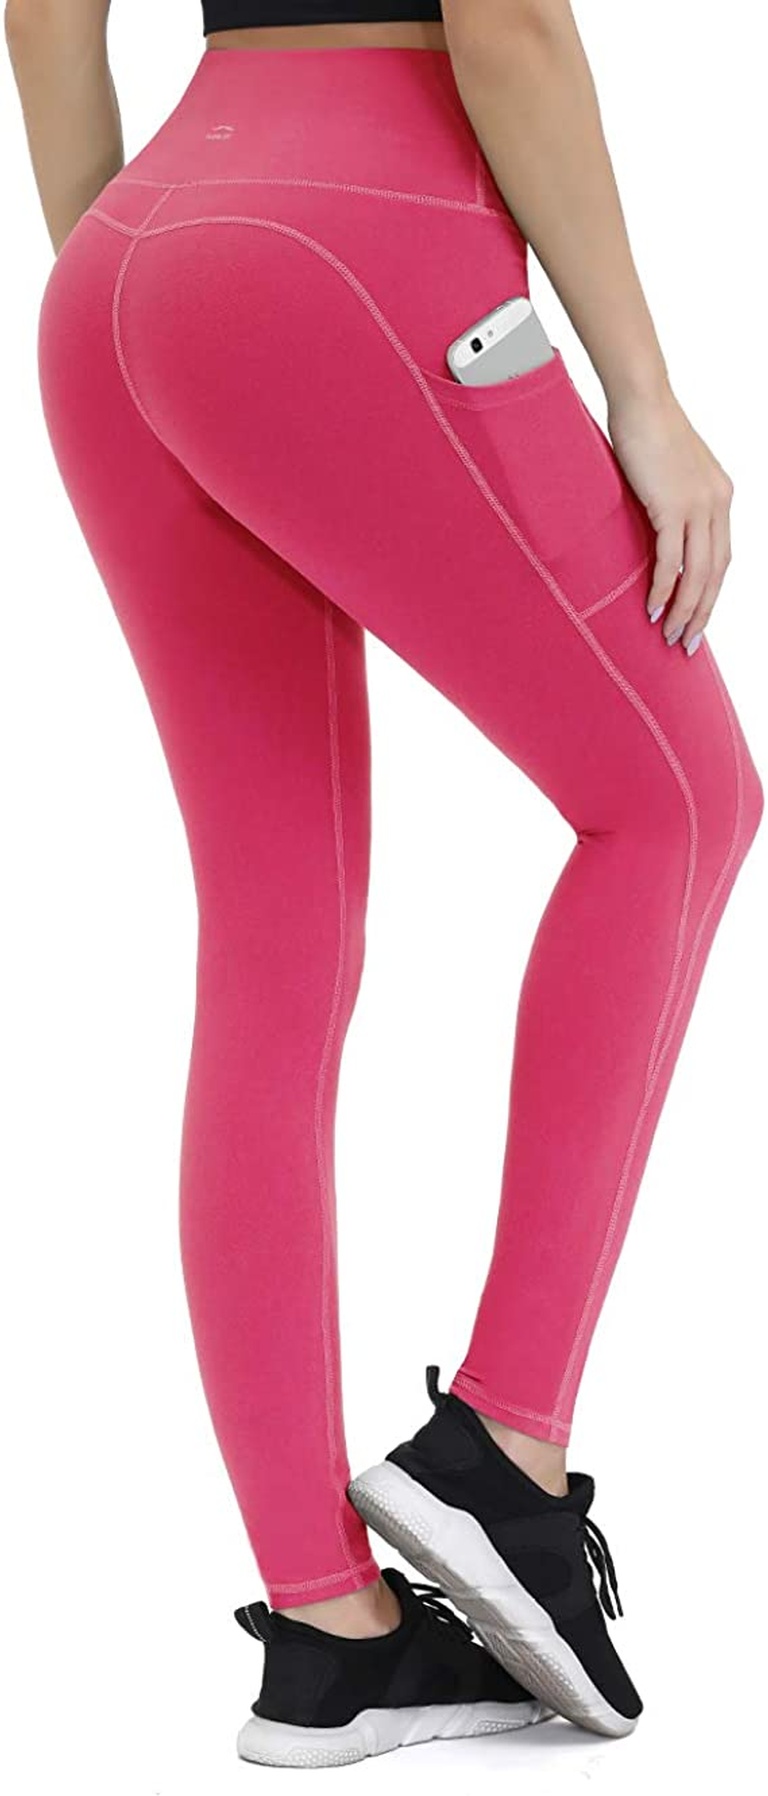 ALONG FIT Yoga Pants for Women Leggings with Side Pockets Yoga Tights Tummy Control